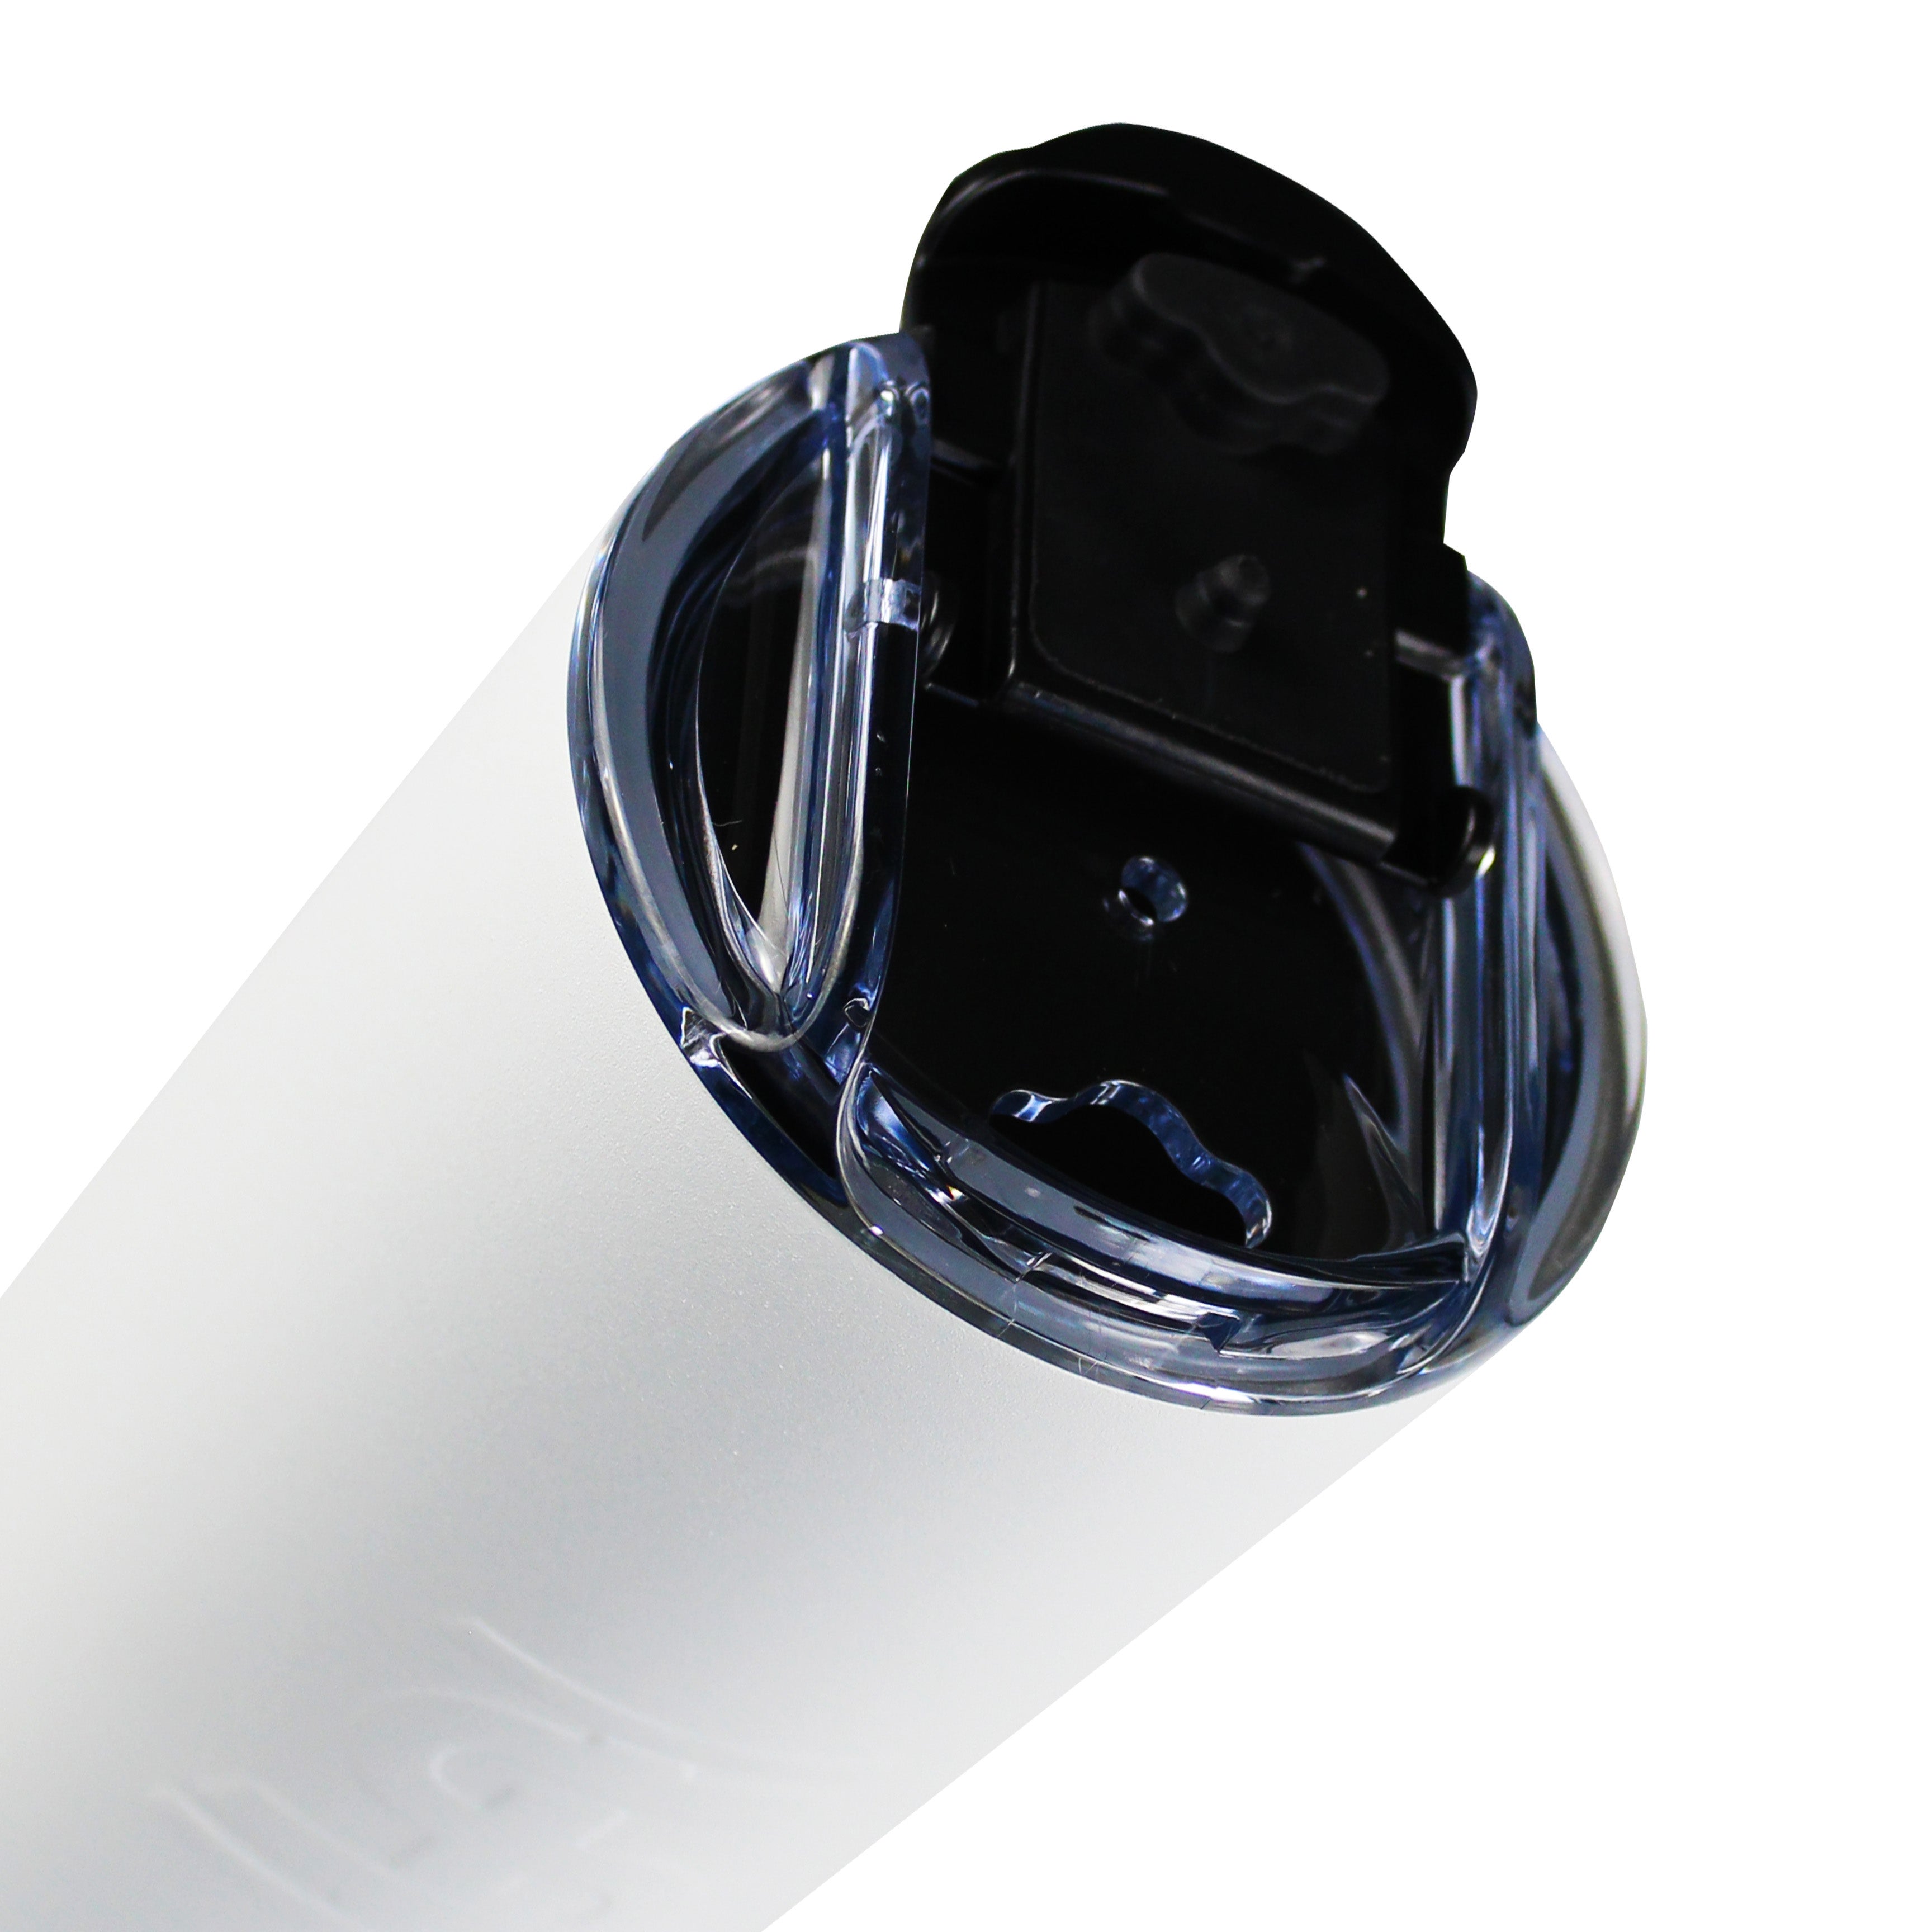 An image of the 20oz Skinny Tumbler tilted so that it shows a close-up view of the Twist-on, Leak-Proof Lid with the drink flap open.